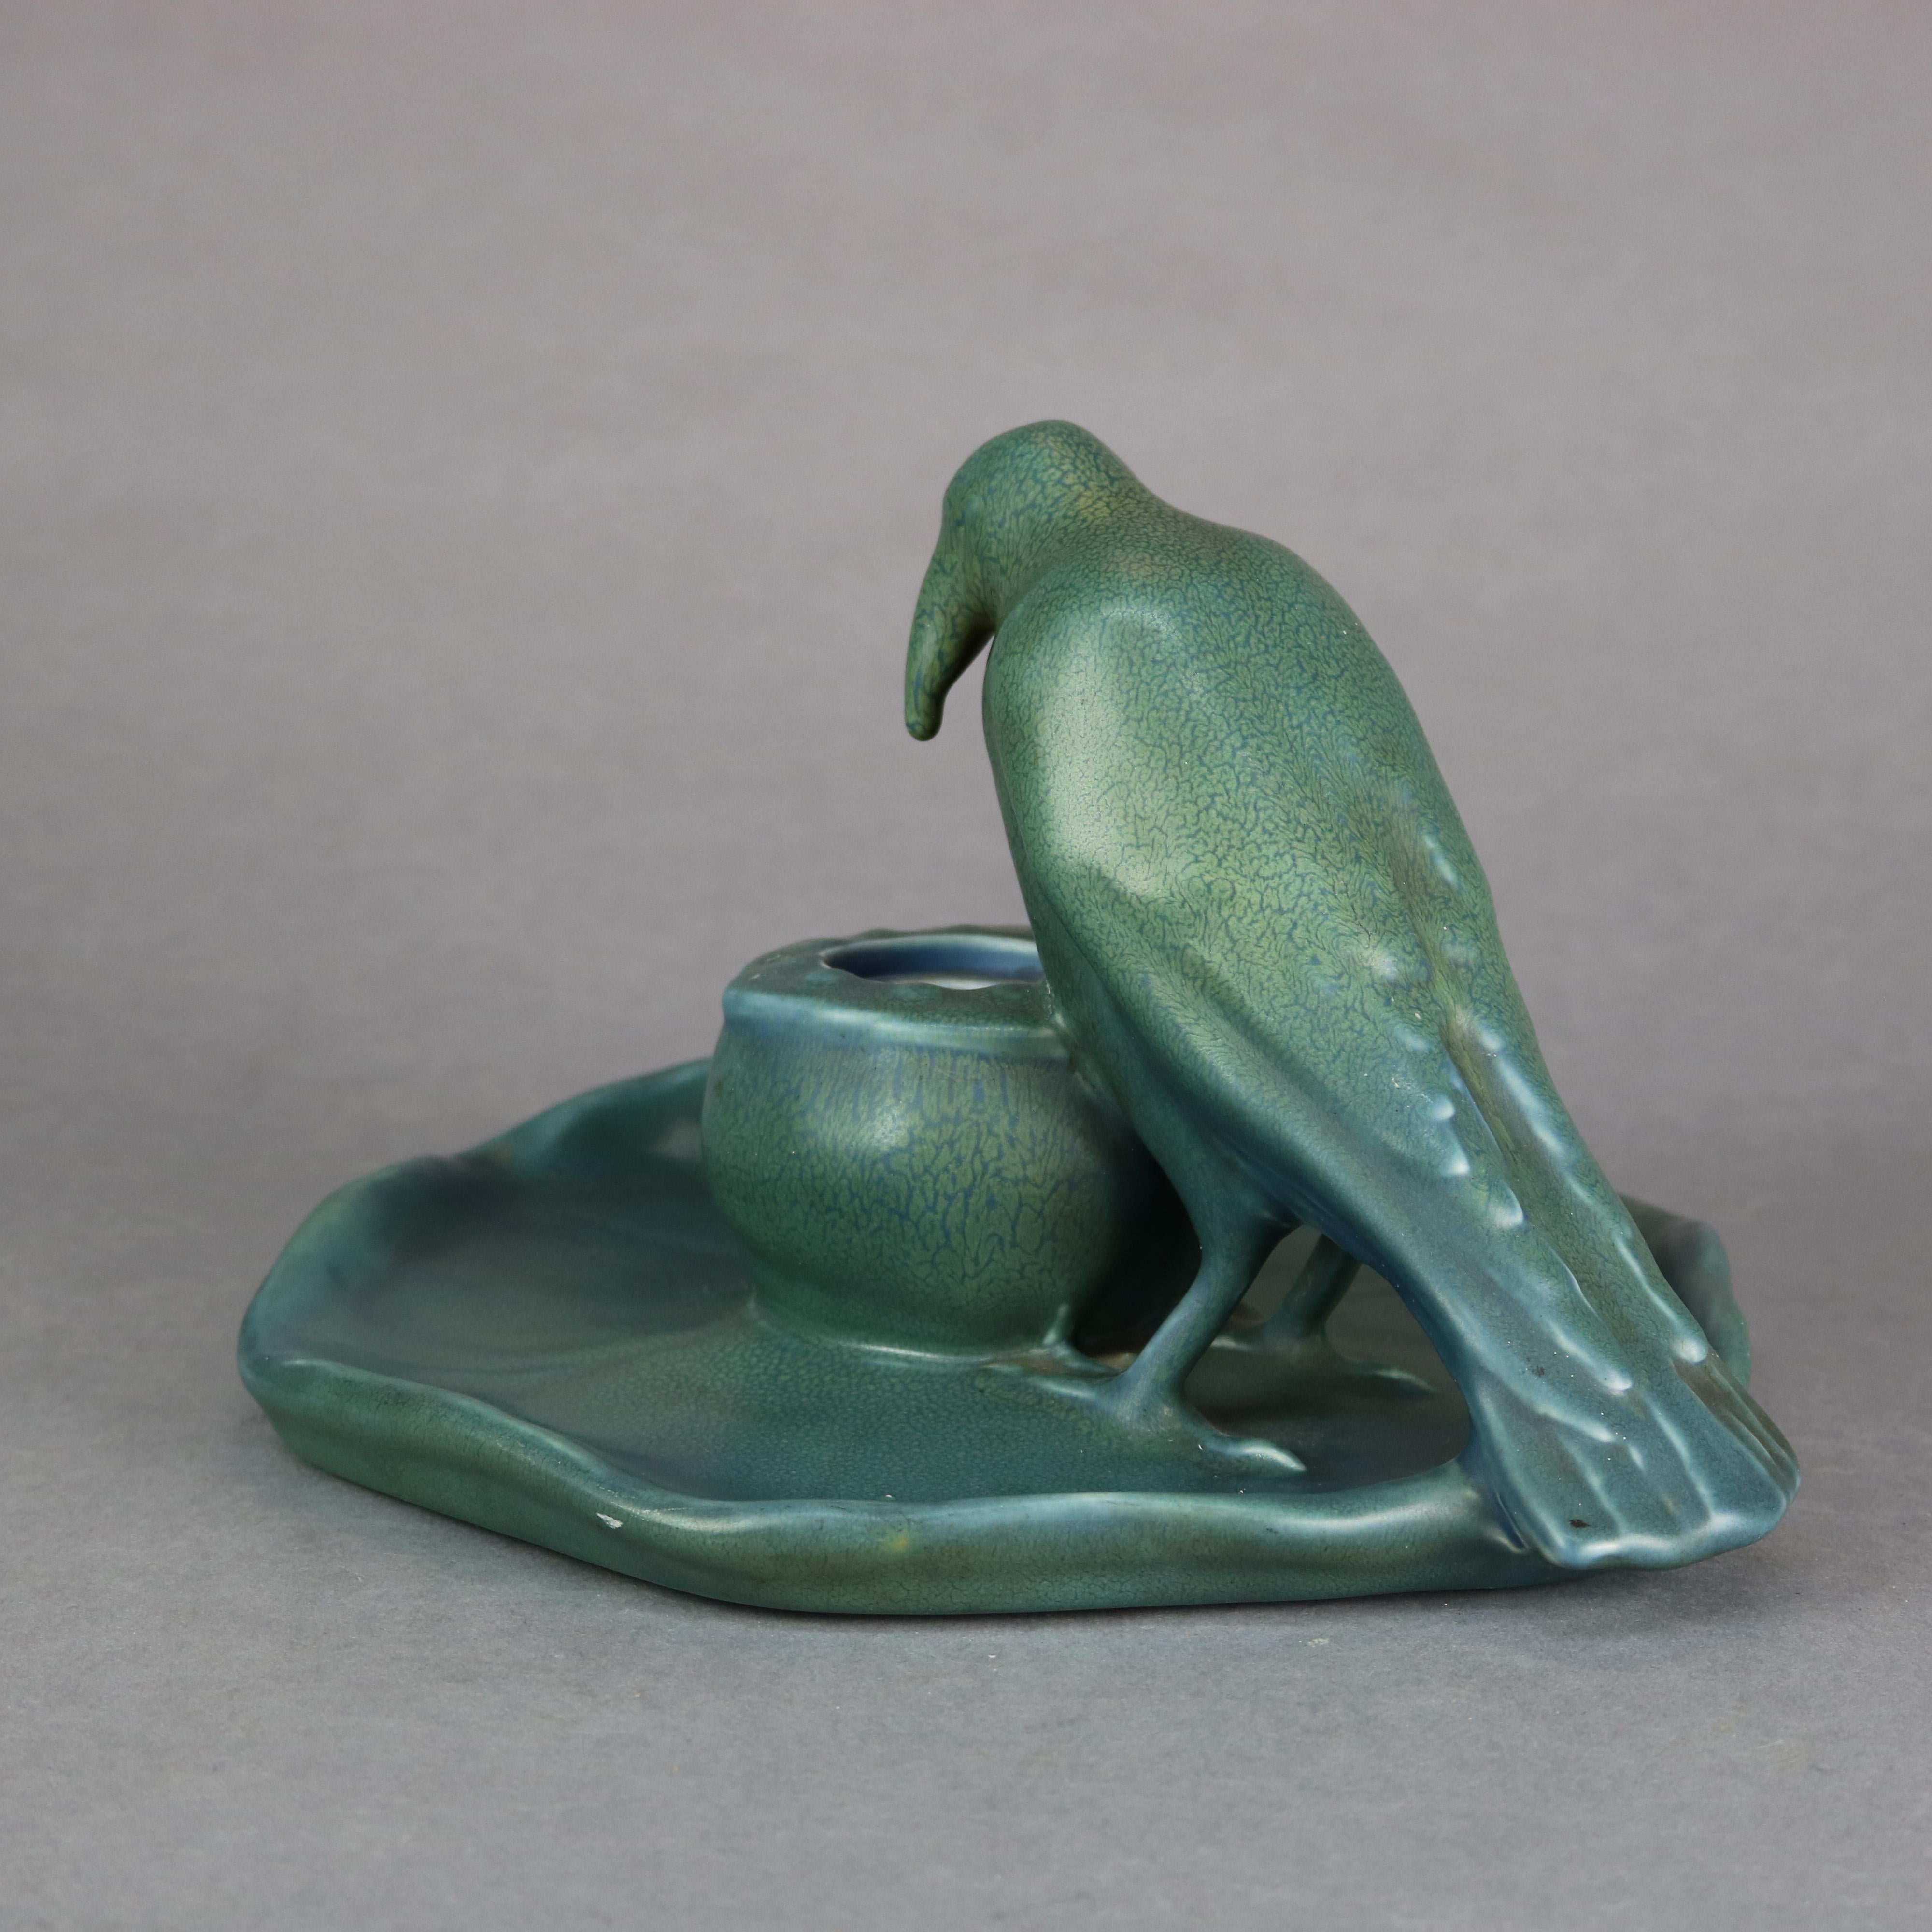 20th Century Rare Antique Rookwood Art Pottery Figural Bird Inkwell, Dated 1920